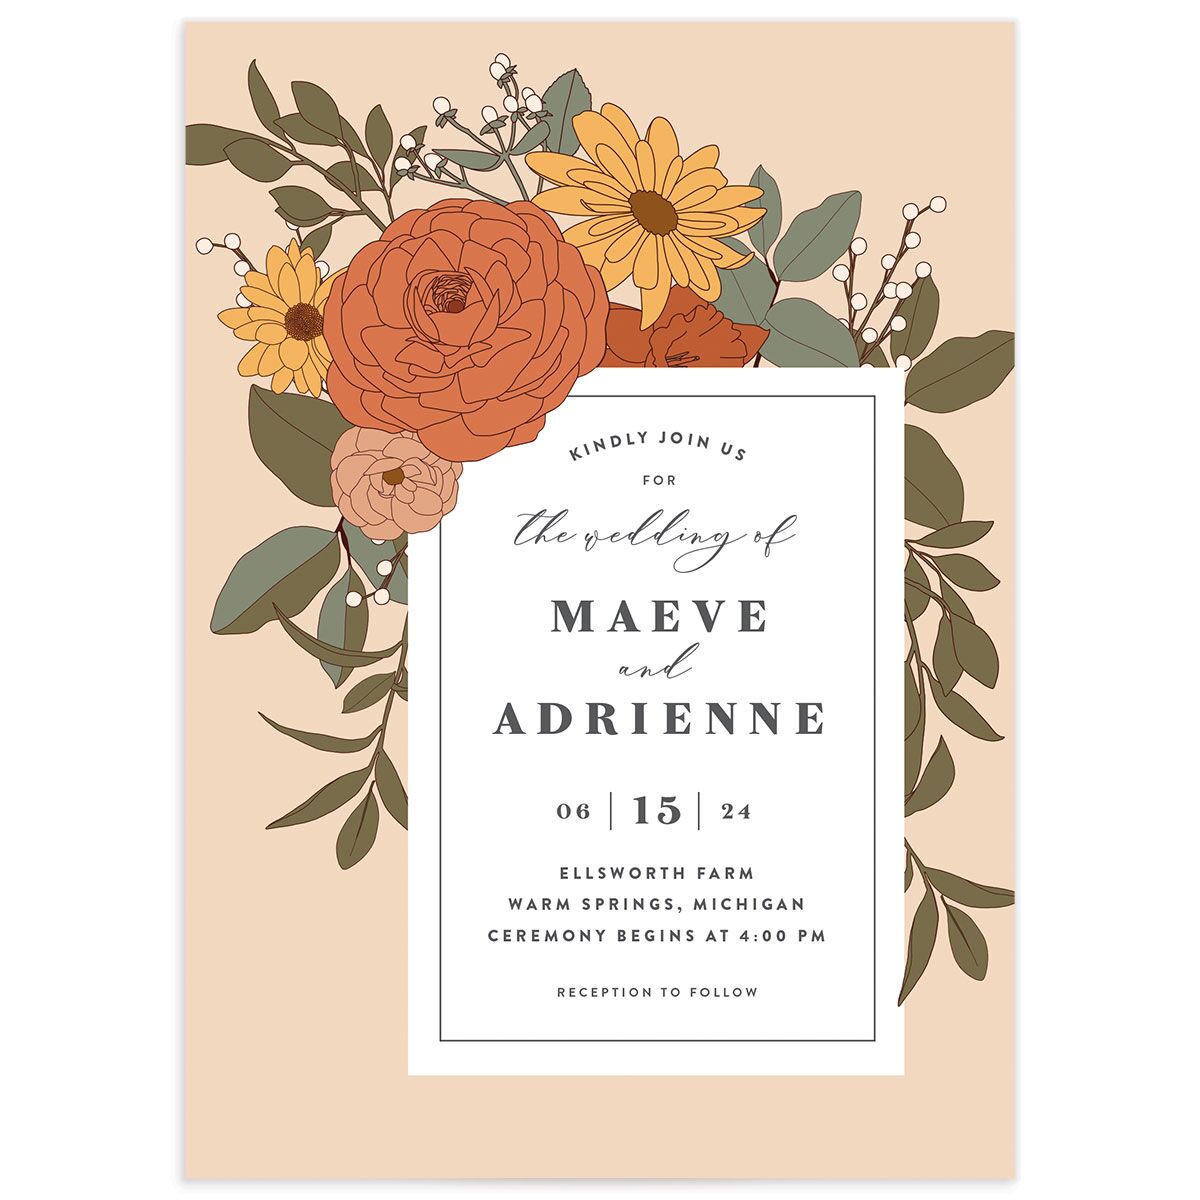 A Wedding Invitation from the Retro Botanical Collection